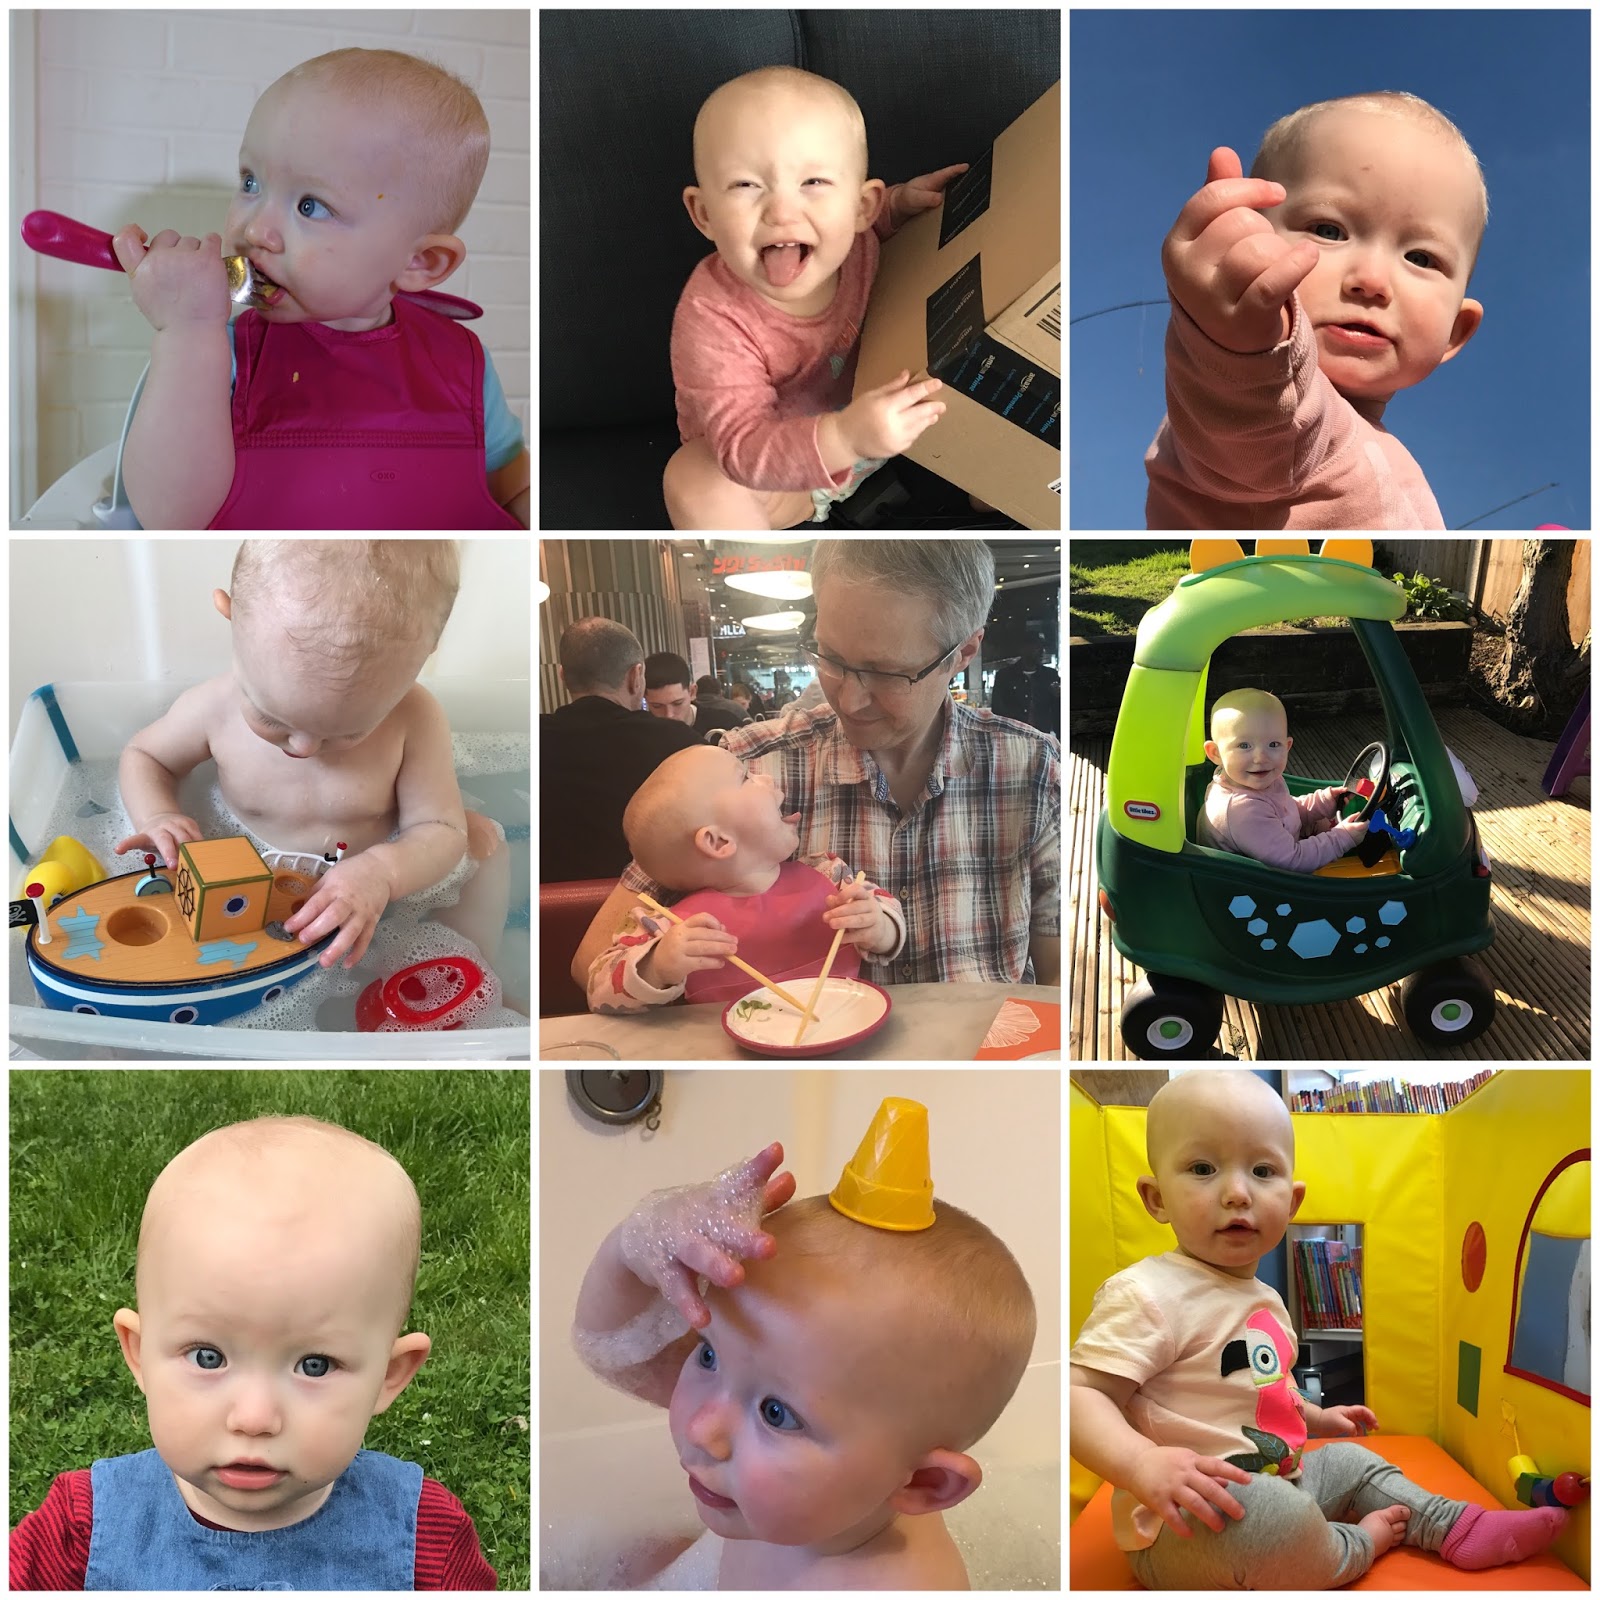 Baby Development 14 Months Talking: What to Expect